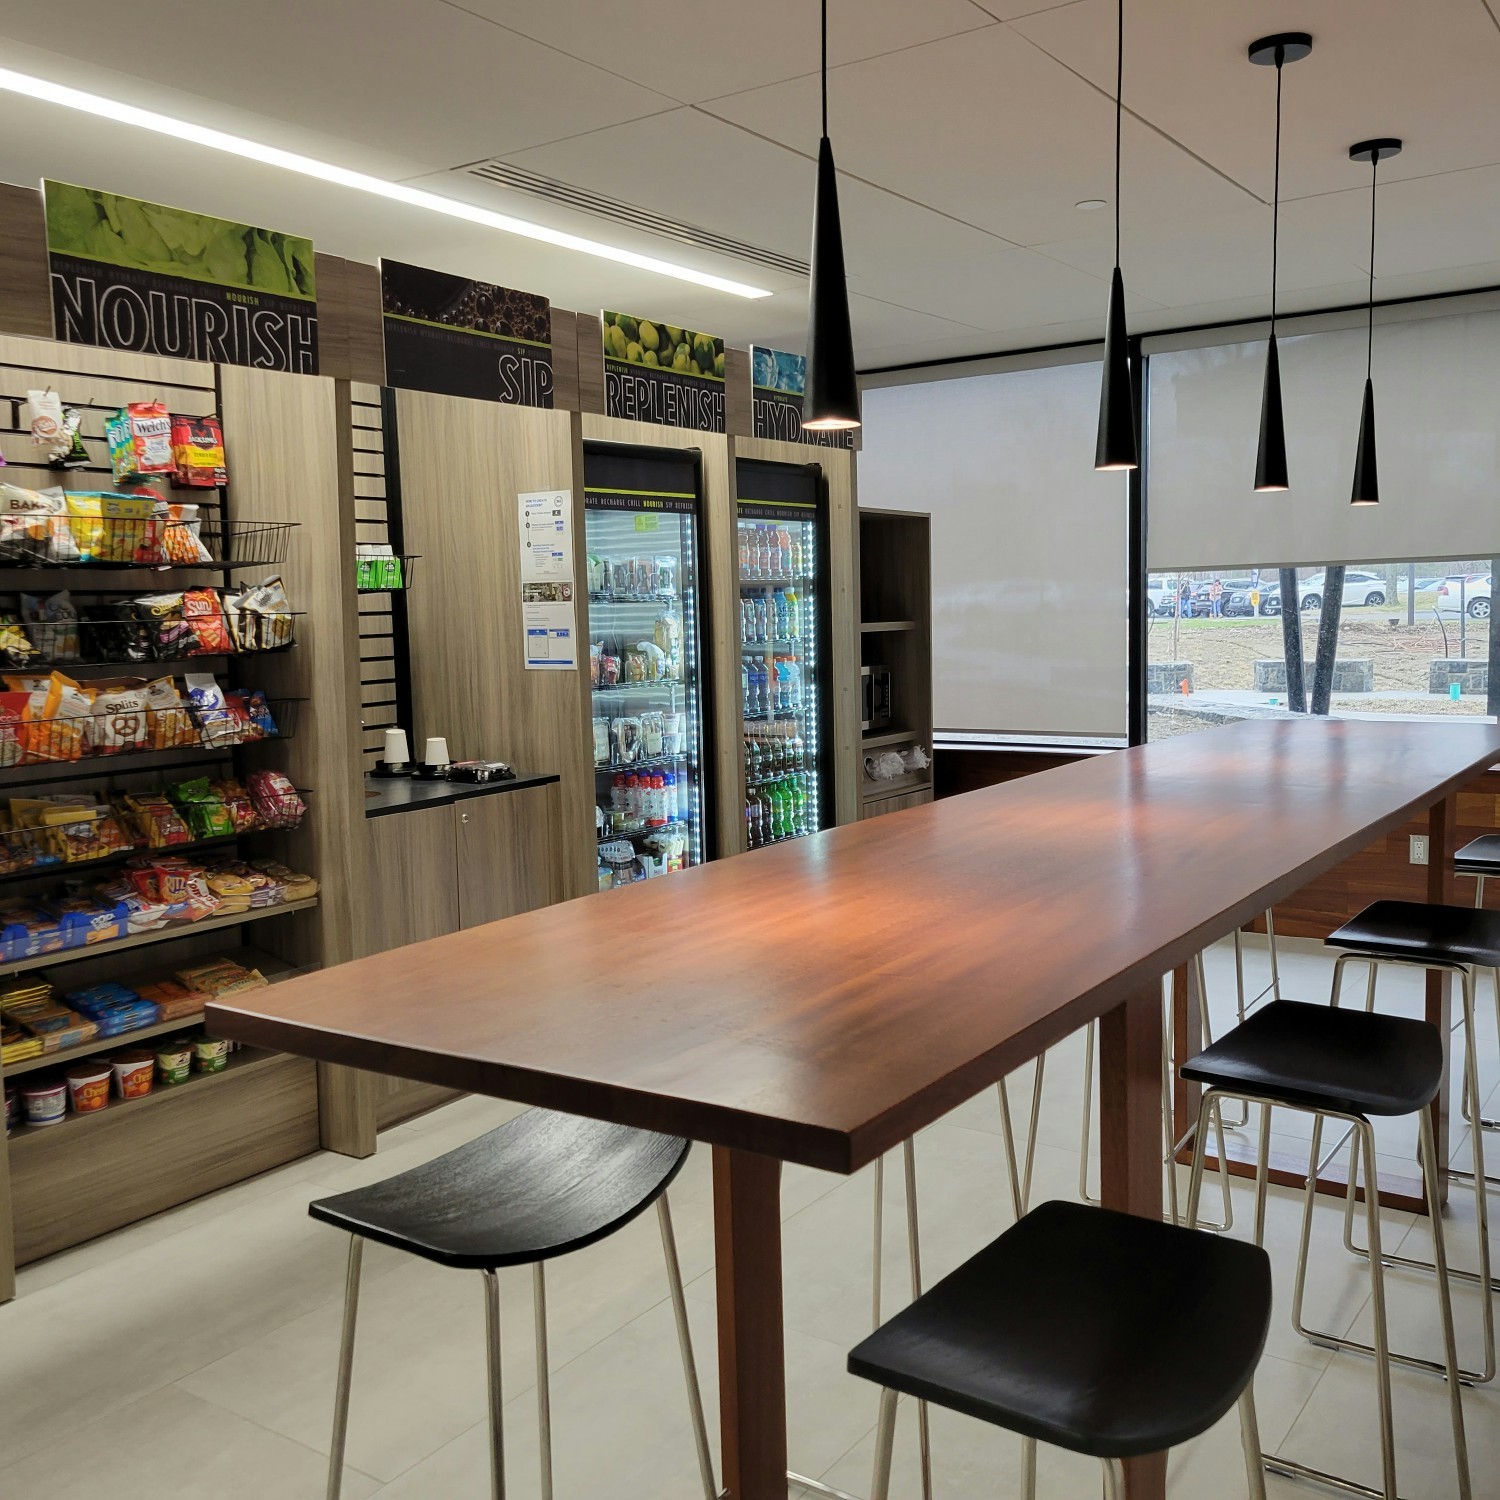 Our corporate office offers the convenience of an onsite store and fitness center for local employees.